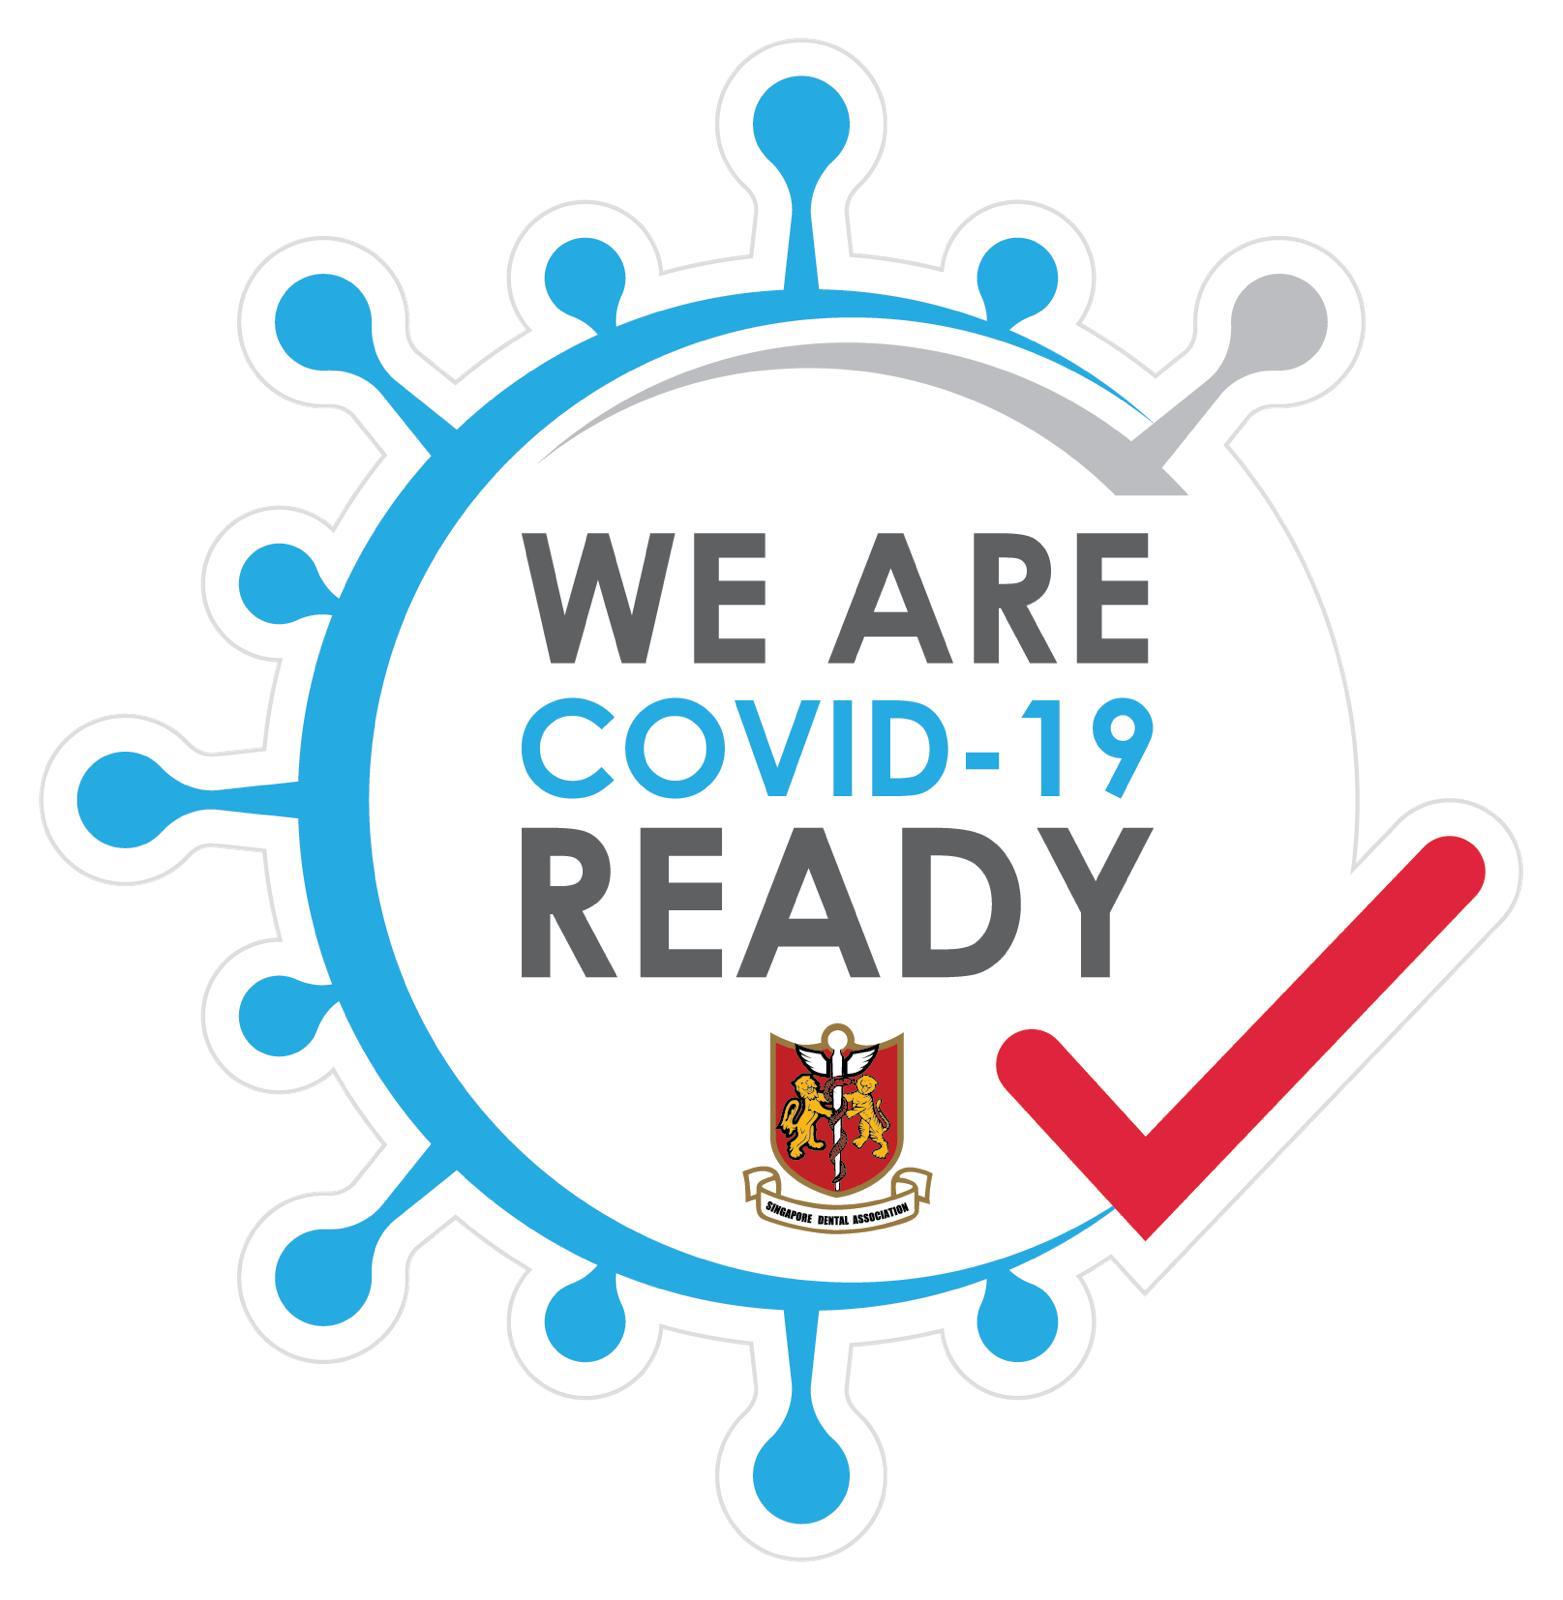 We are COVID-19 ready!